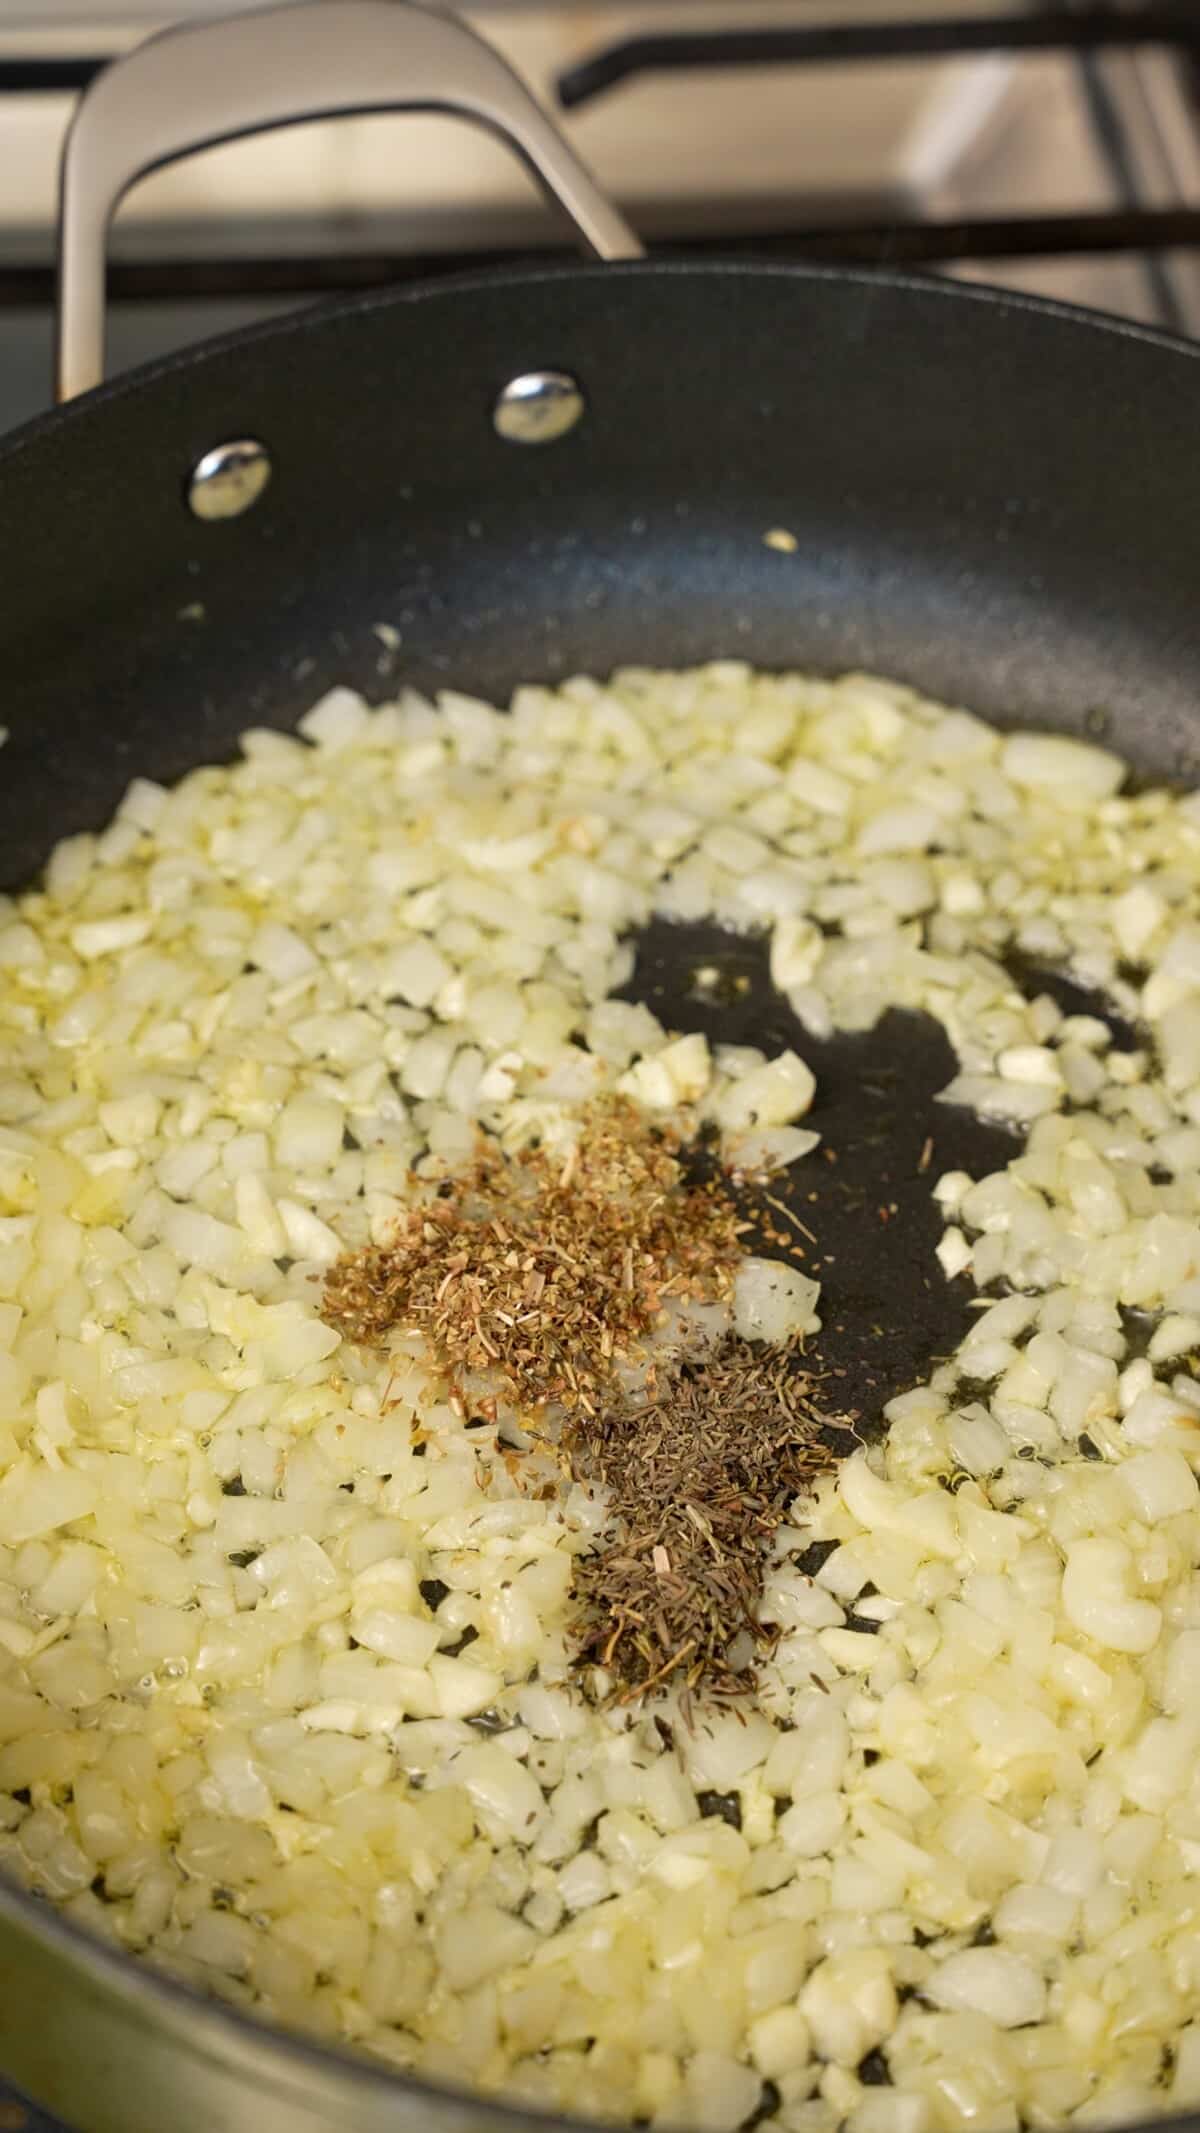 Onions, garlic, and dry seasonings sauteing in a pan with olive oil.